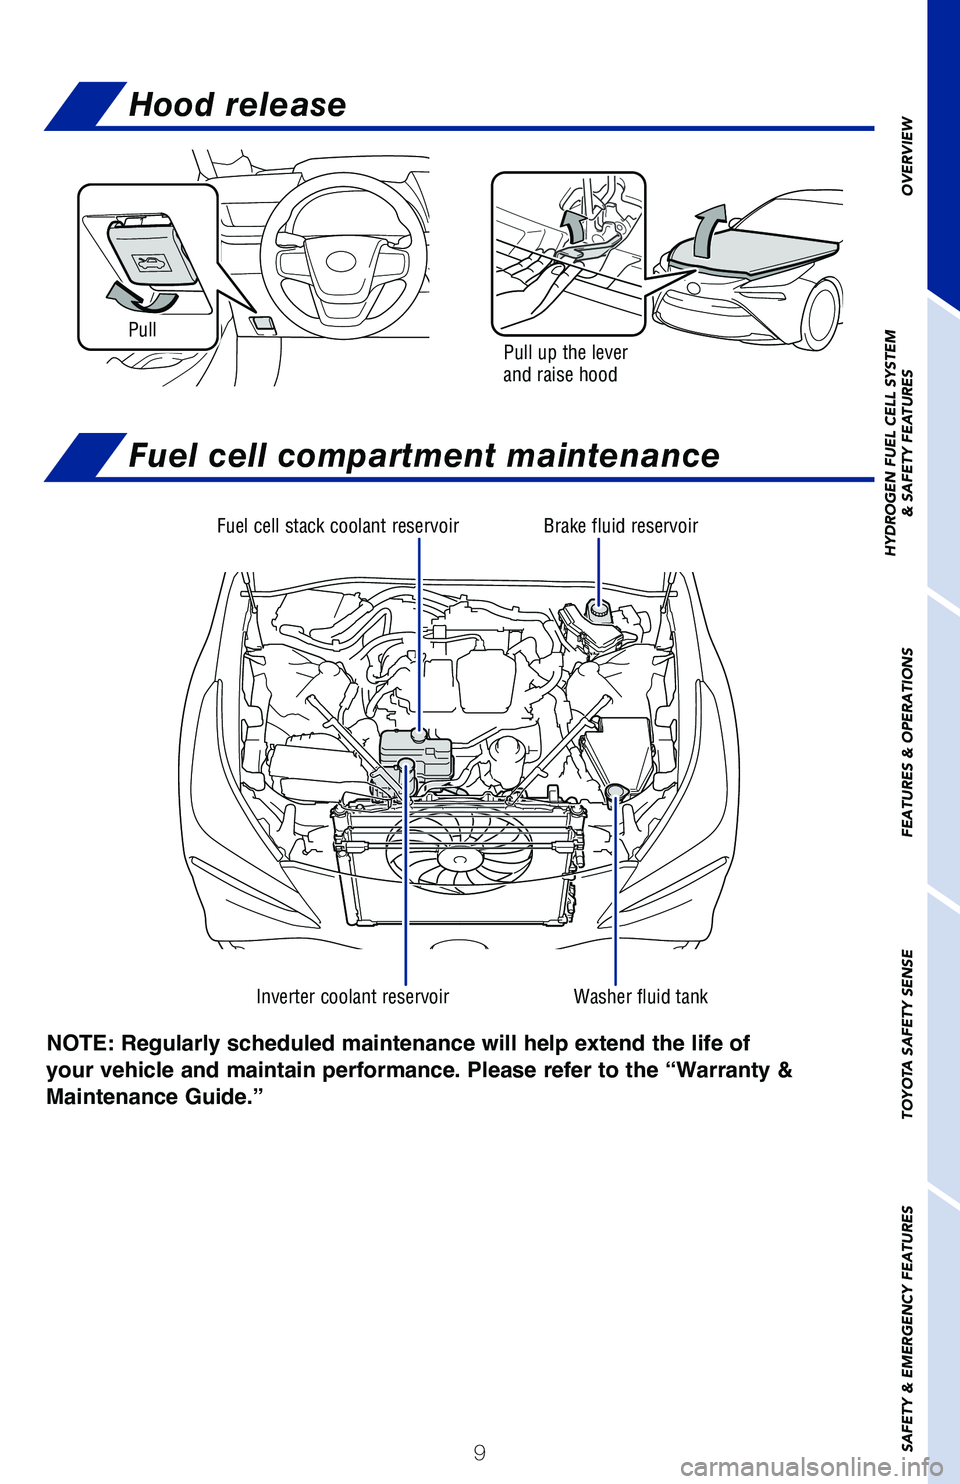 TOYOTA MIRAI 2021  Owners Manual (in English) 9
OVERVIEW
HYDROGEN FUEL CELL SYSTEM
& SAFETY FEATURES
FEATURES & OPERATIONS
TOYOTA SAFETY SENSE
SAFETY & EMERGENCY FEATURES
Hood release
Fuel cell compartment maintenance
Pull up the lever 
and raise